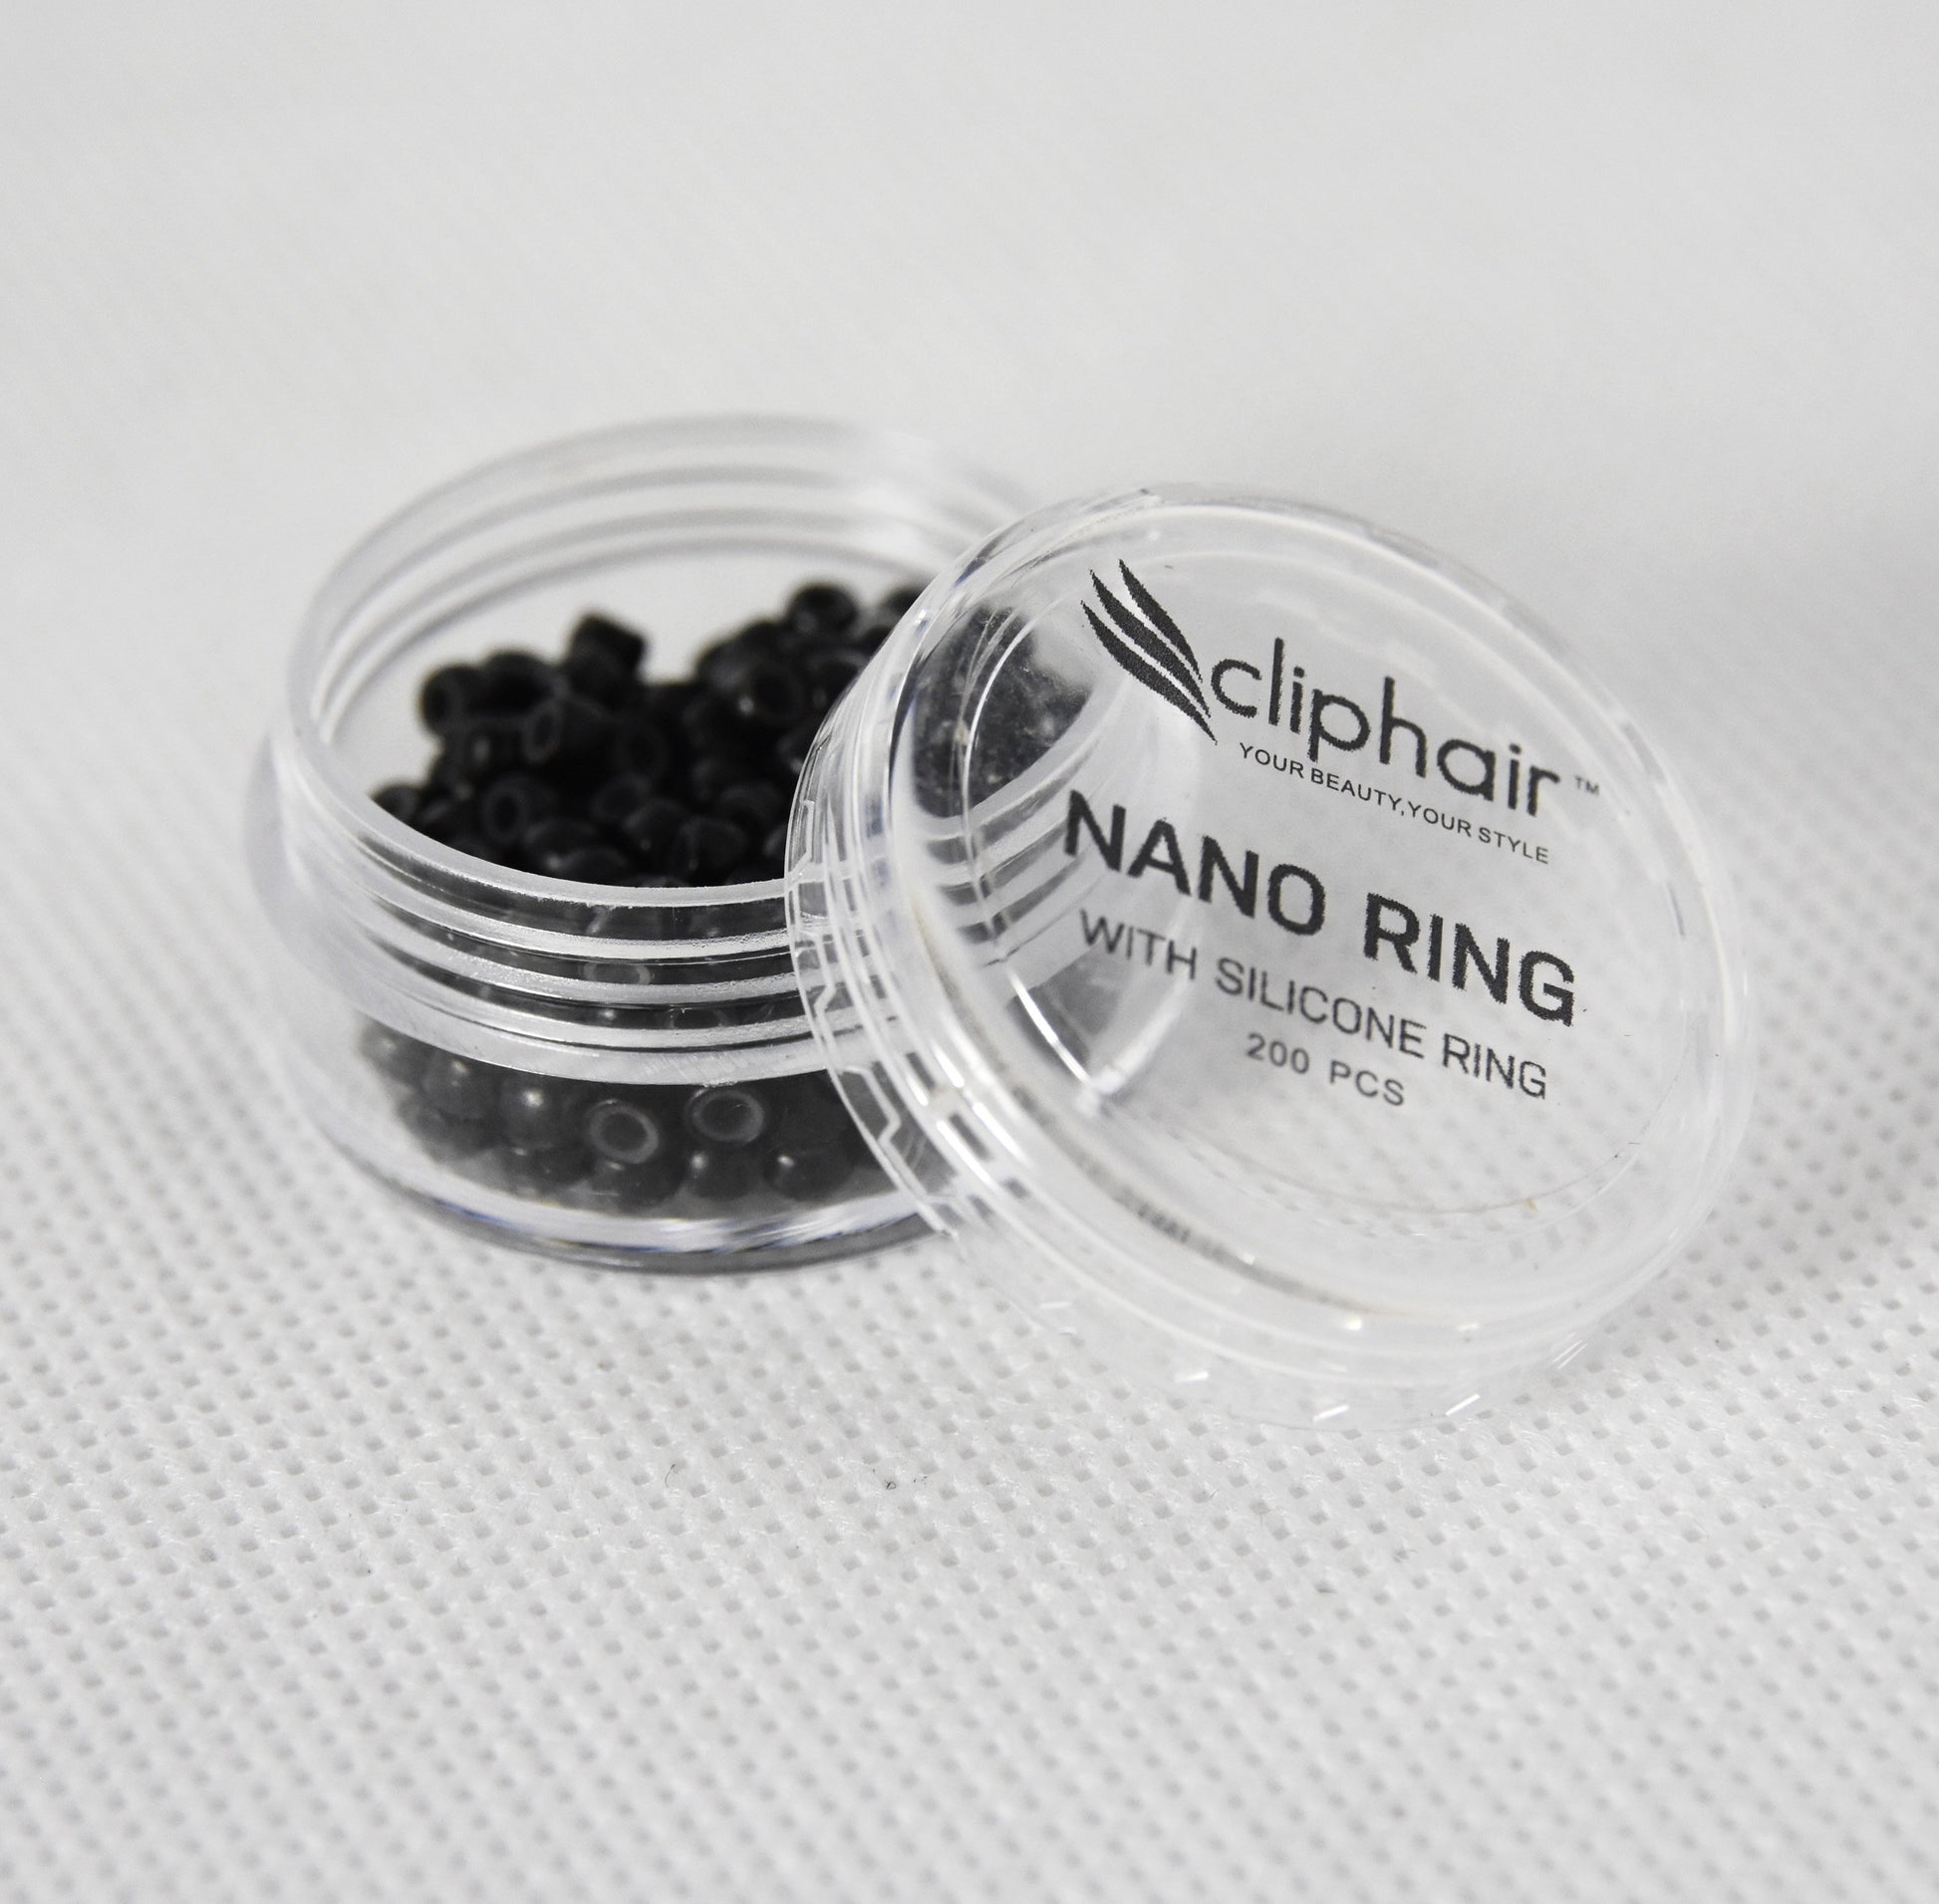 SILICONE LINED NANO RINGS/BEADS -200 Pack Accessories Cliphair UK Black 